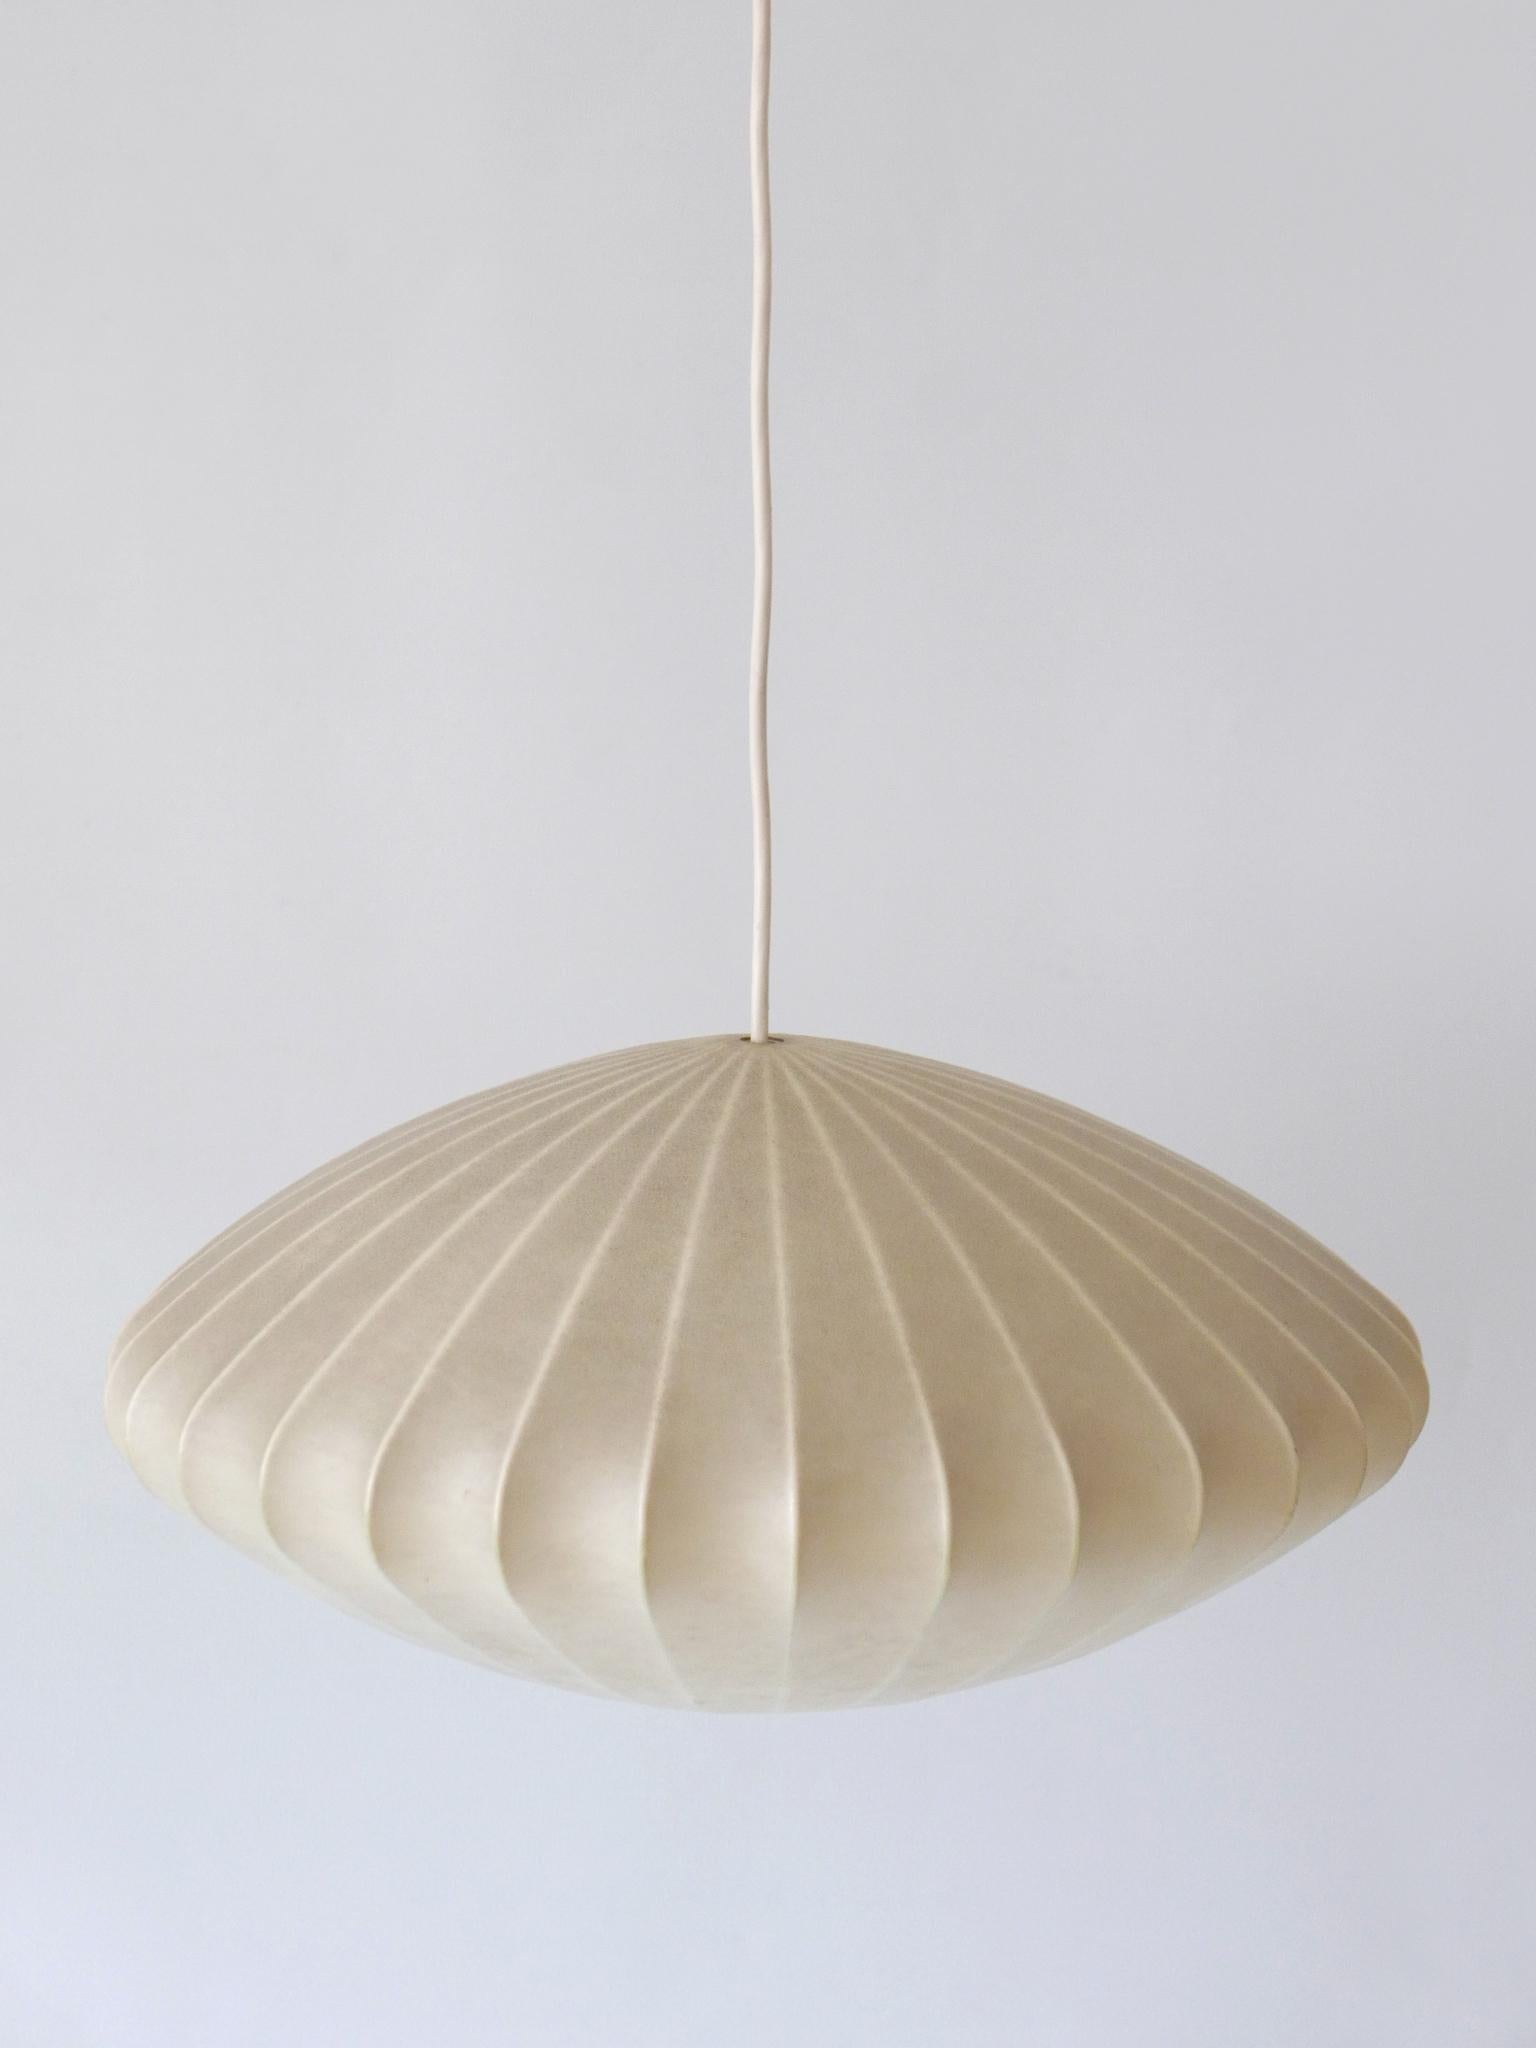 Rare Mid-Century Modern Cocoon Pendant Lamp or Hanging Light by Goldkant 1960s For Sale 8